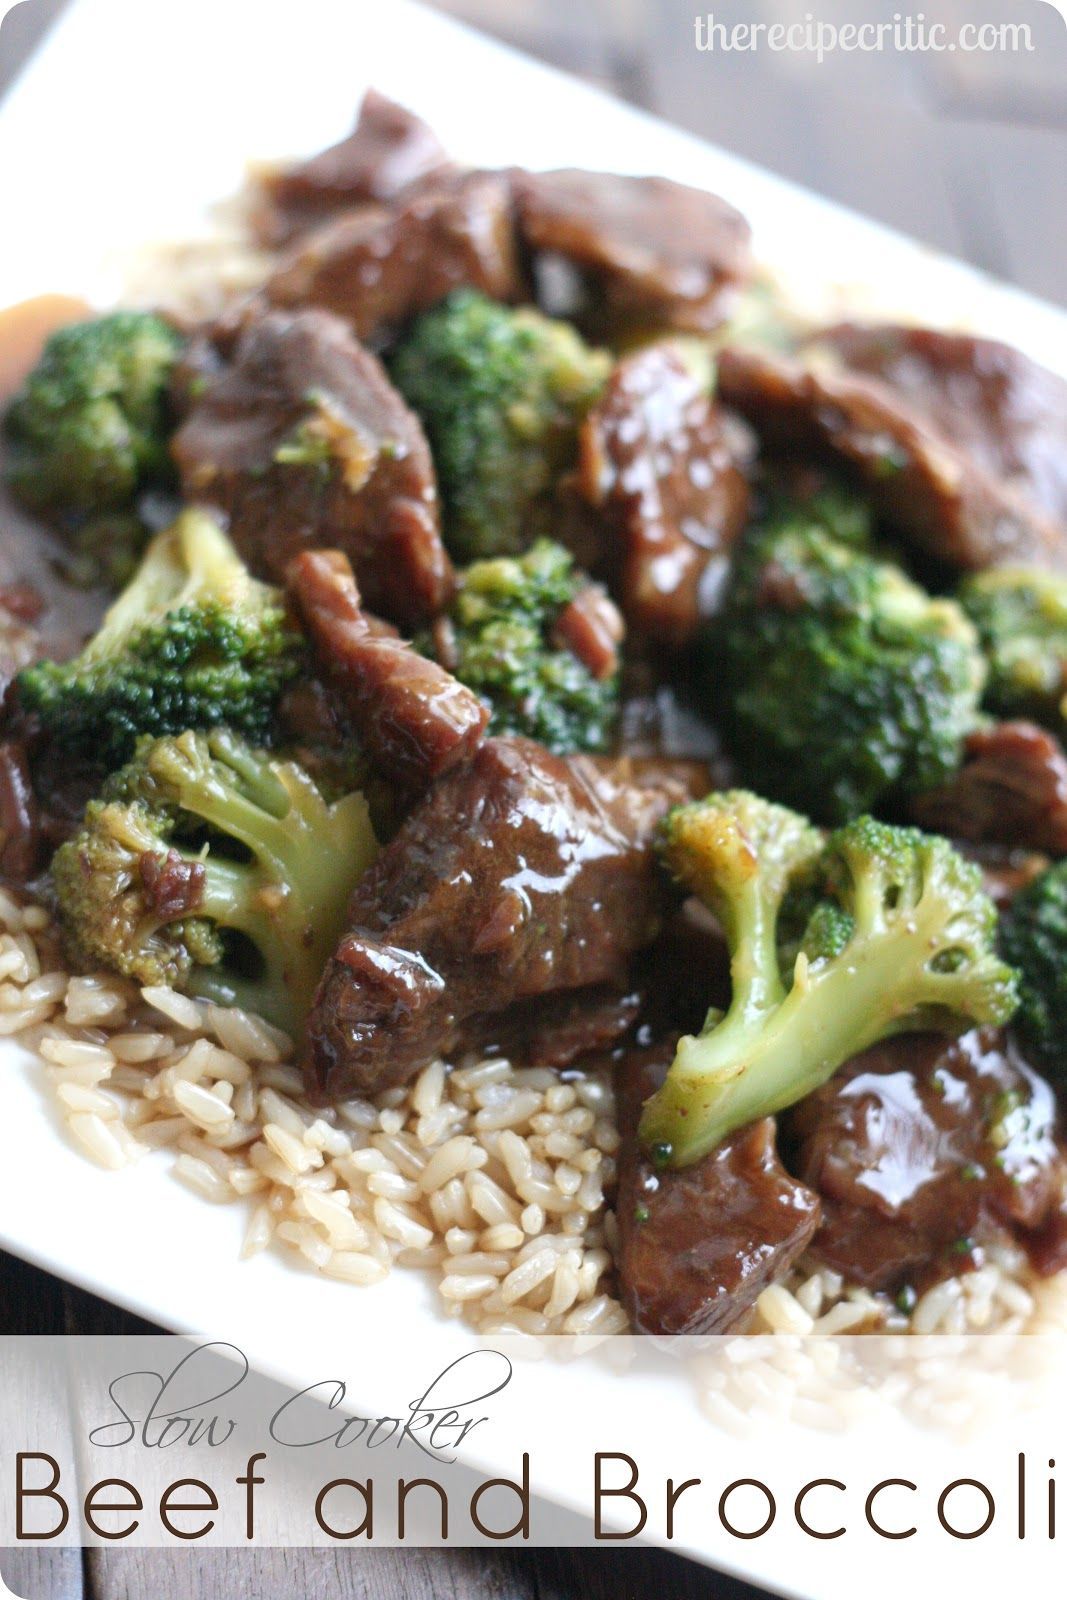 Slow Cooker Beef and Broccoli Blogger's note:  Things that I would do differ